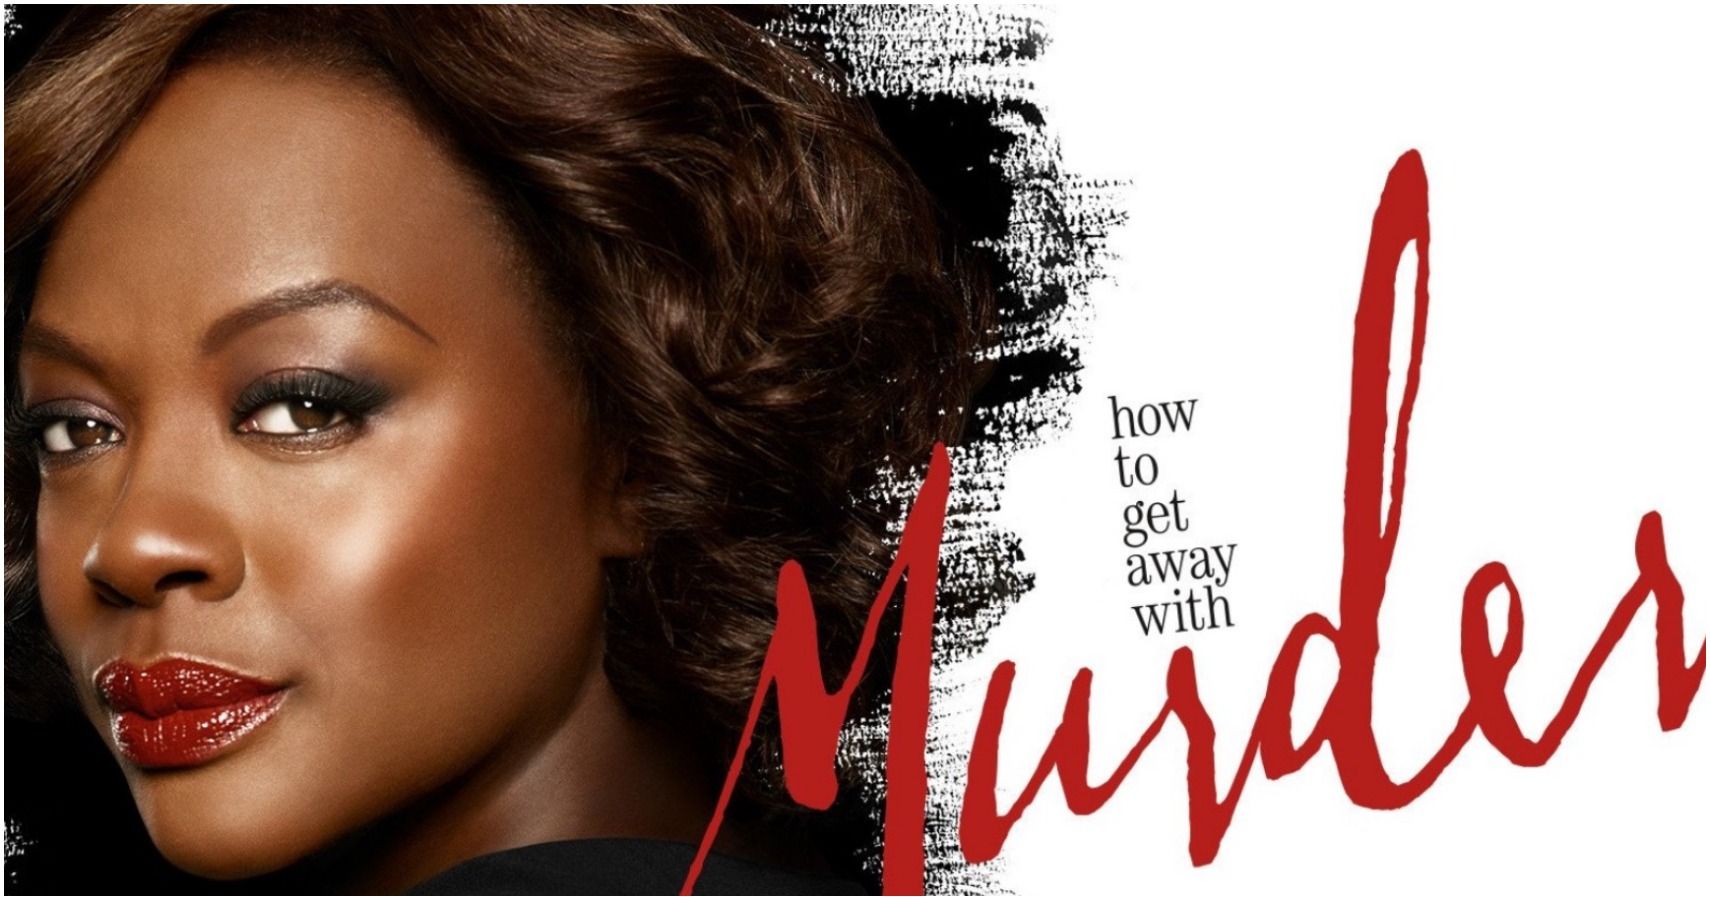 How To Get Away With Murder: Top Episodes of Season 3, Ranked (According To IMDb) - How To Get Away From Murders Season 3